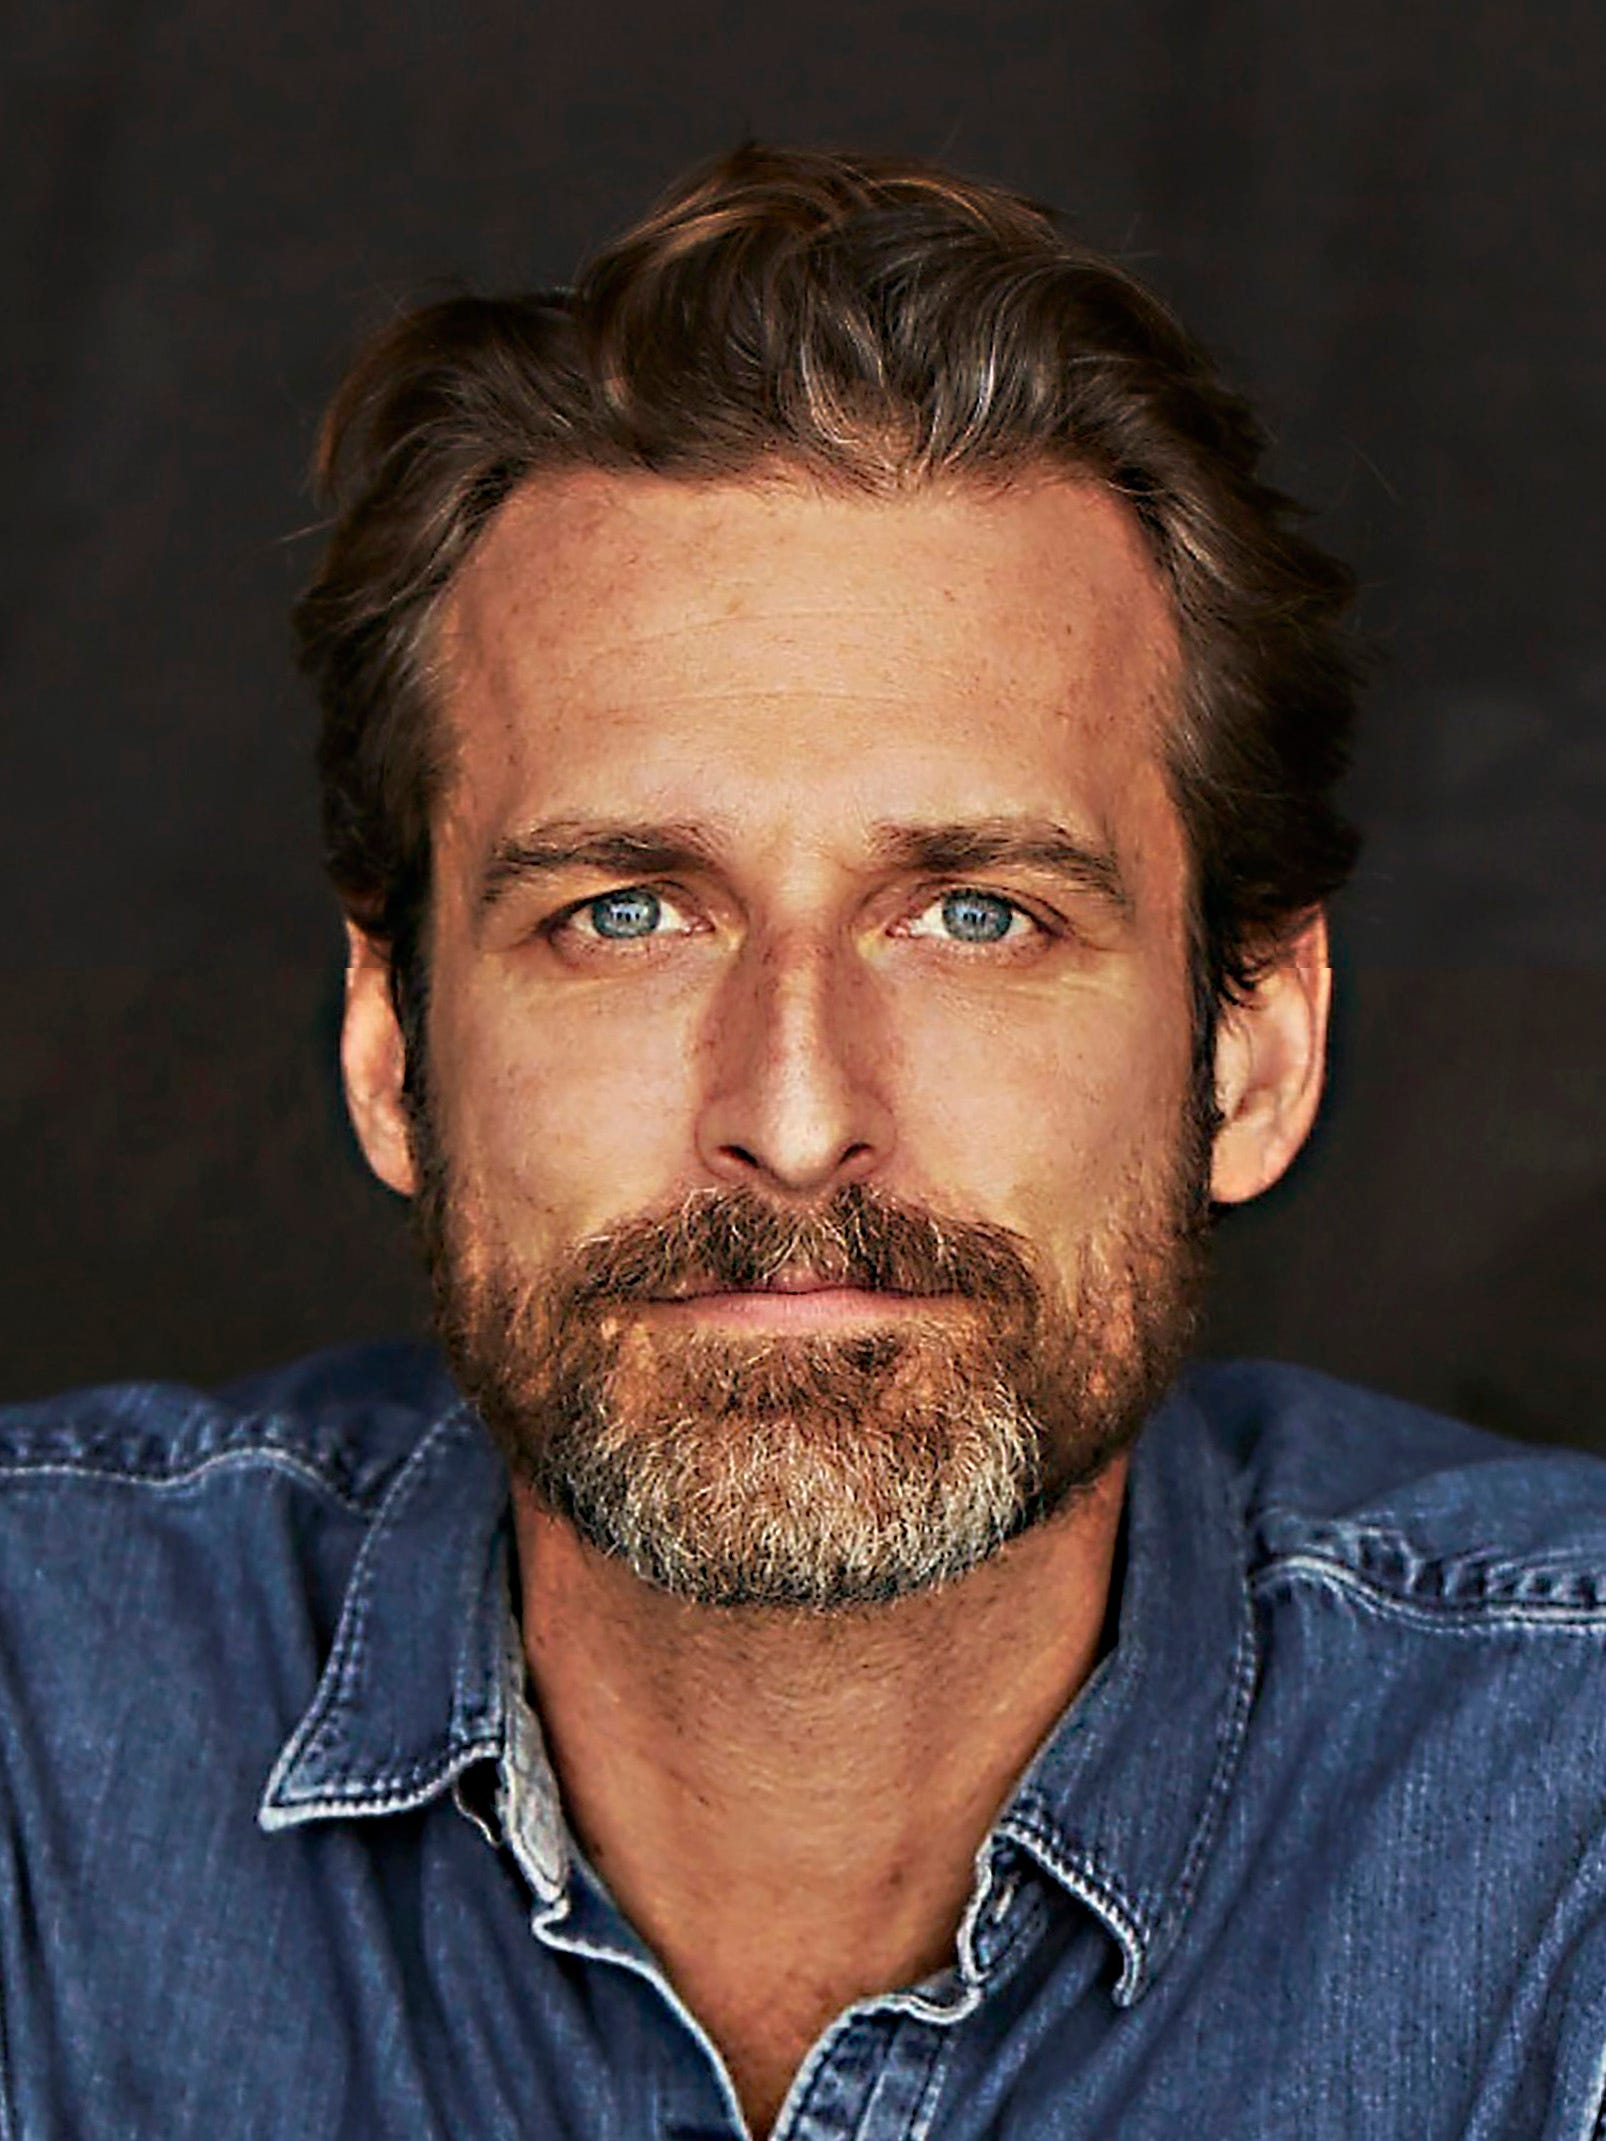 LETTERS FROM A HUMAN BEING by Alexi Lubomirski